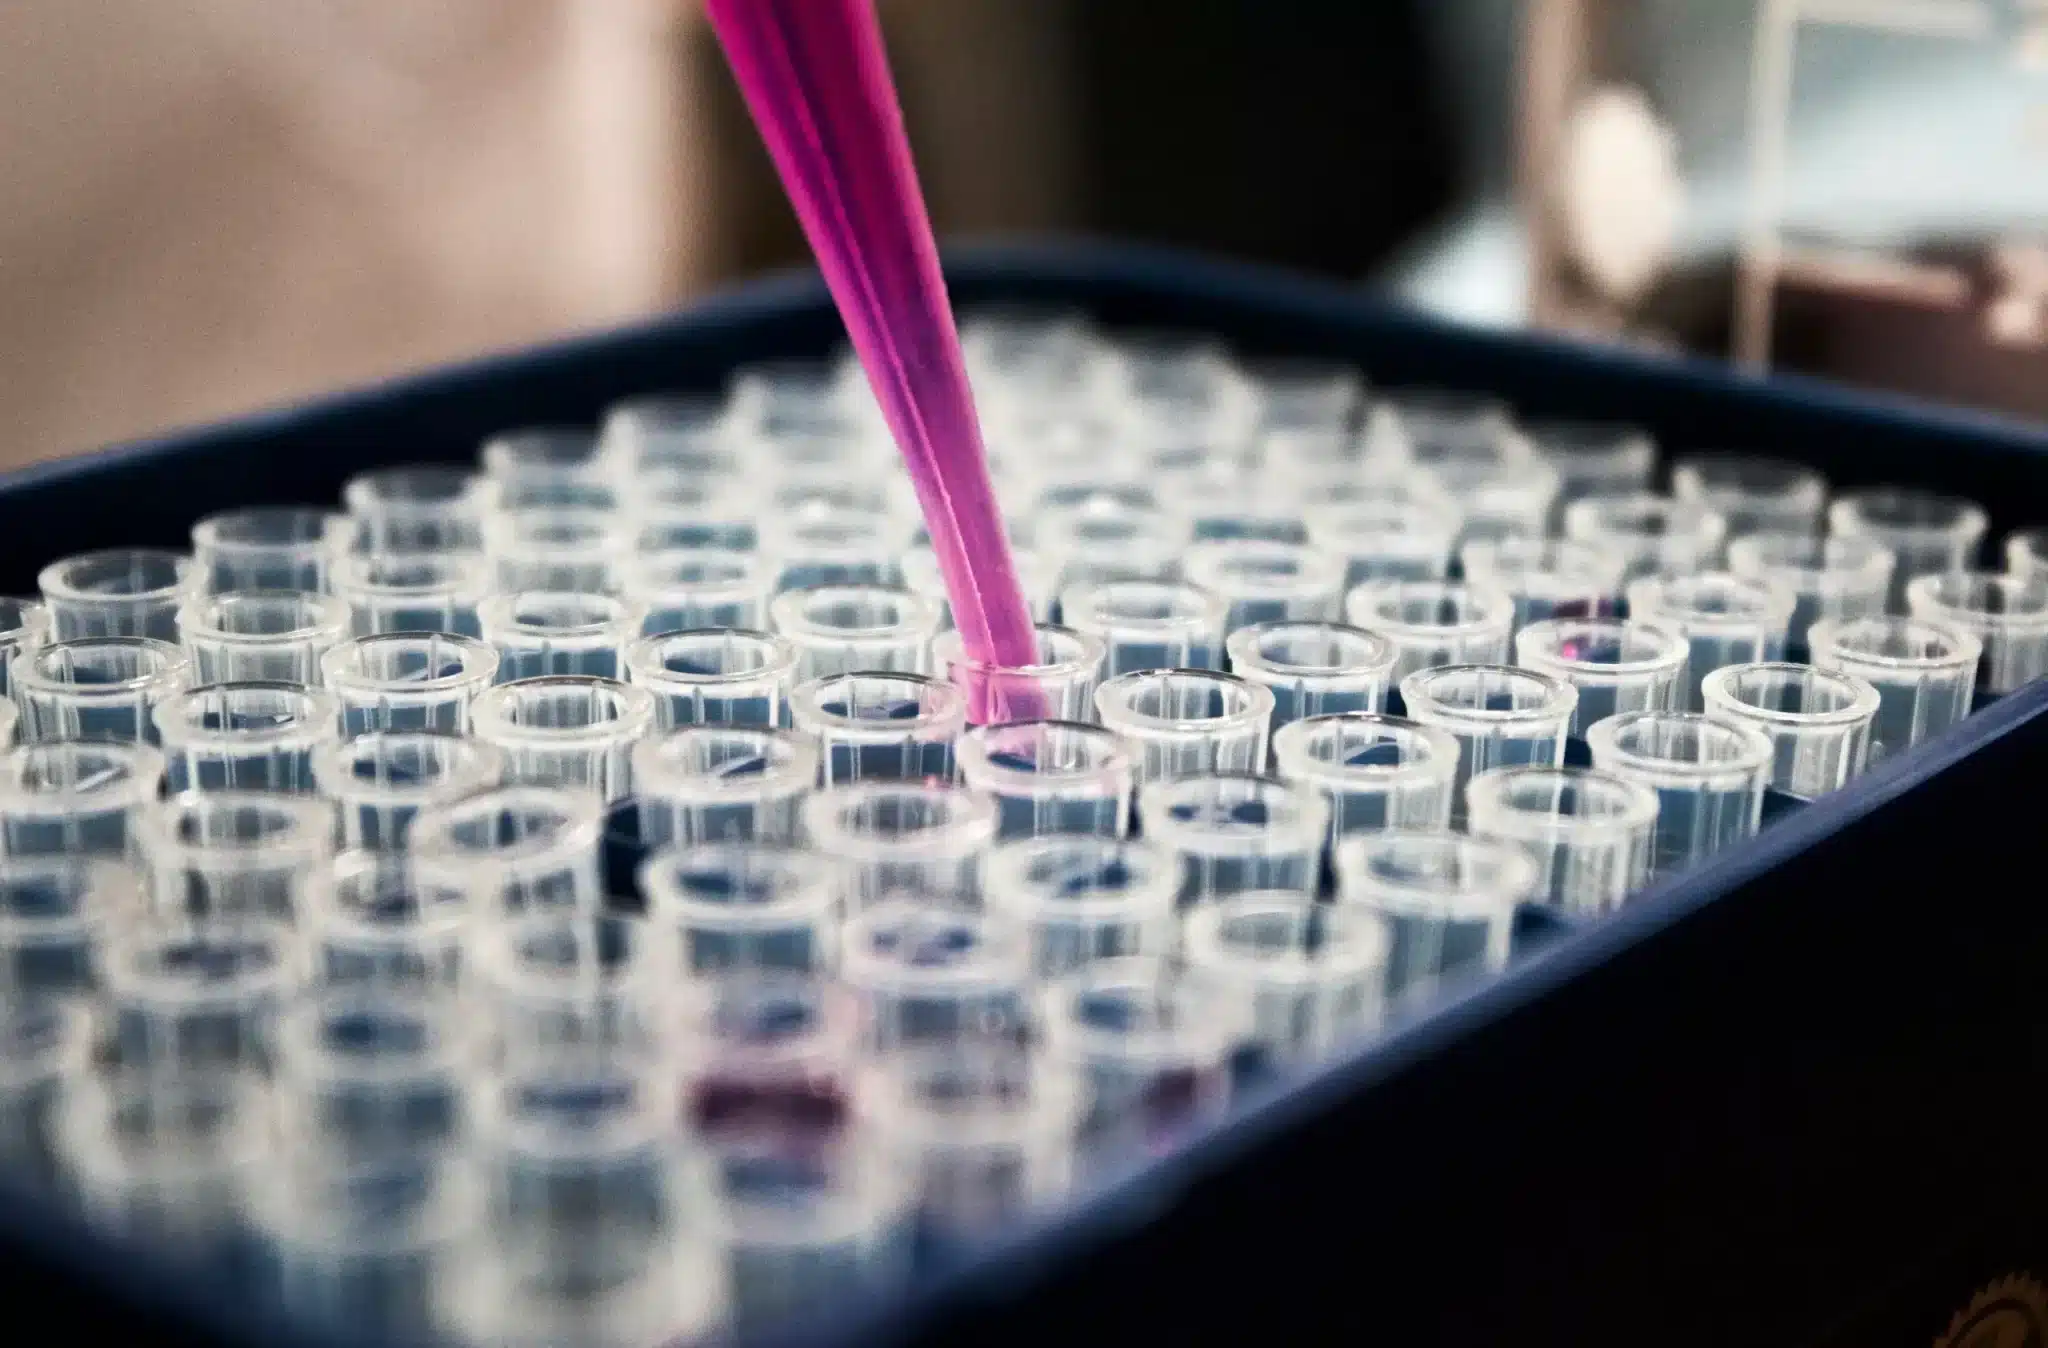 A pipette dispensing a purple substance into one of many small, cylindrical wells contained in a microtiter plate. This laboratory equipment is commonly used for experiments requiring precise volume measurements and is essential for various biochemical analyses.